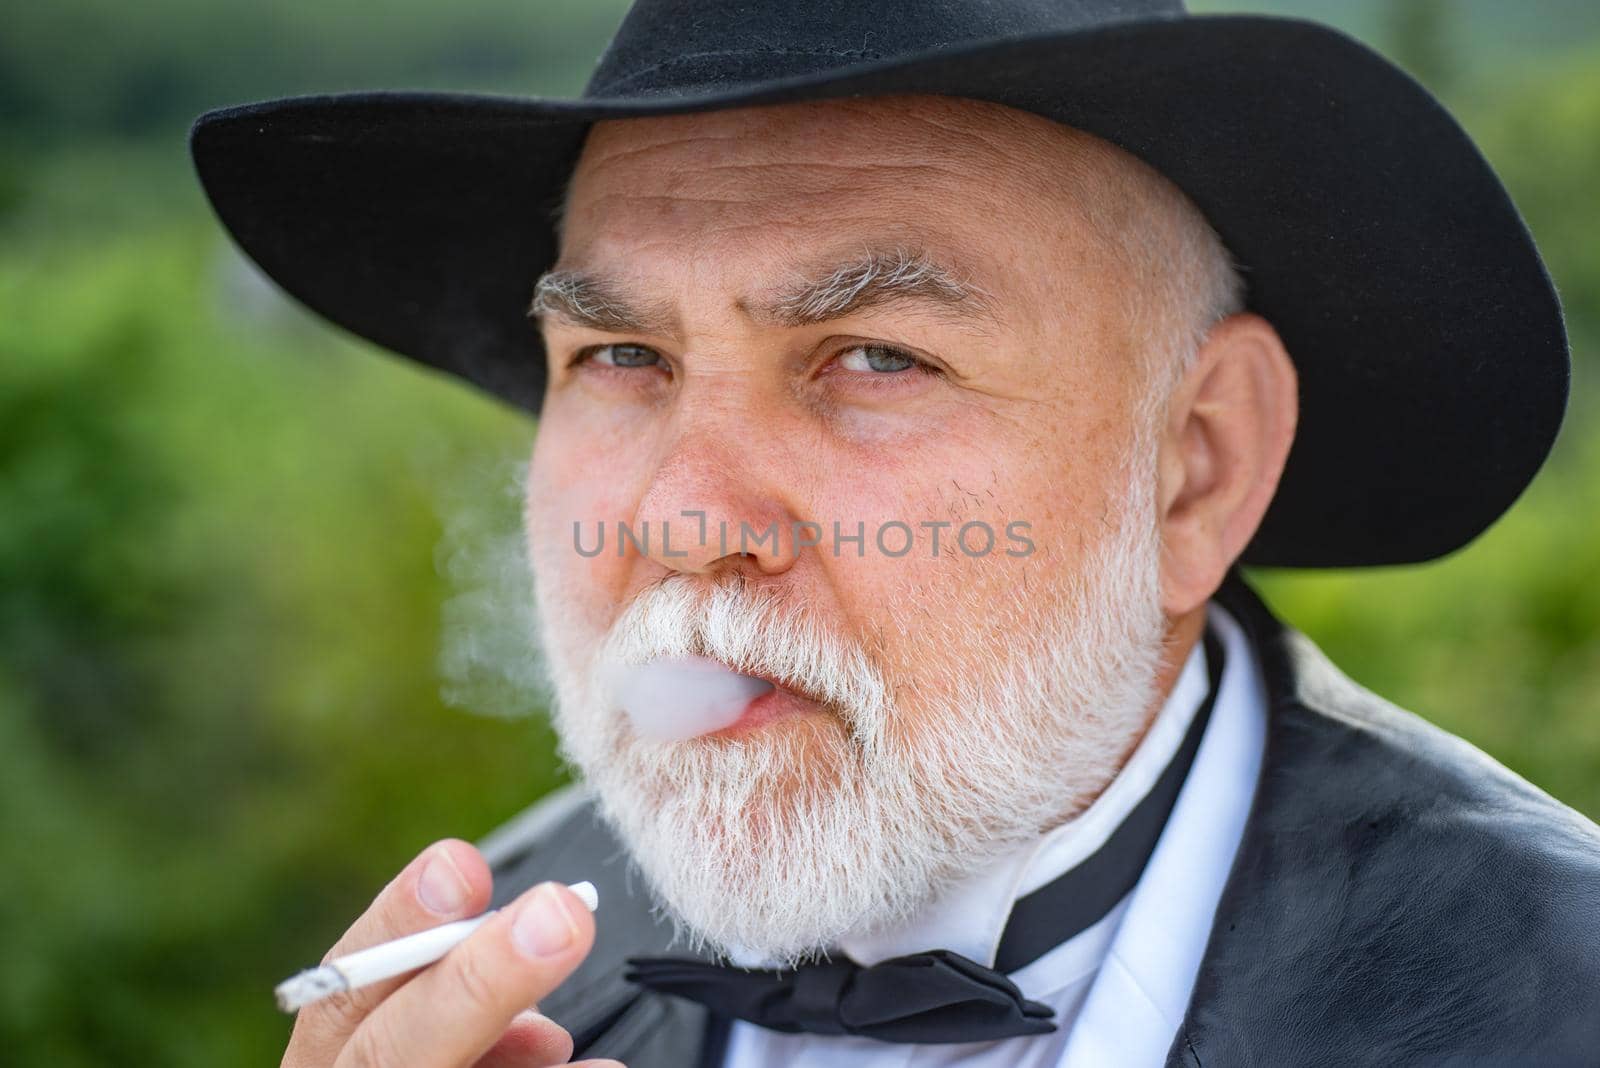 Close up face portrait of handsome senior with gray beard smoking cigarette. Attractive elderly mature man. Senior glamour vintage man wearing suit and tie and hat. Gangster look, Mafia pimp